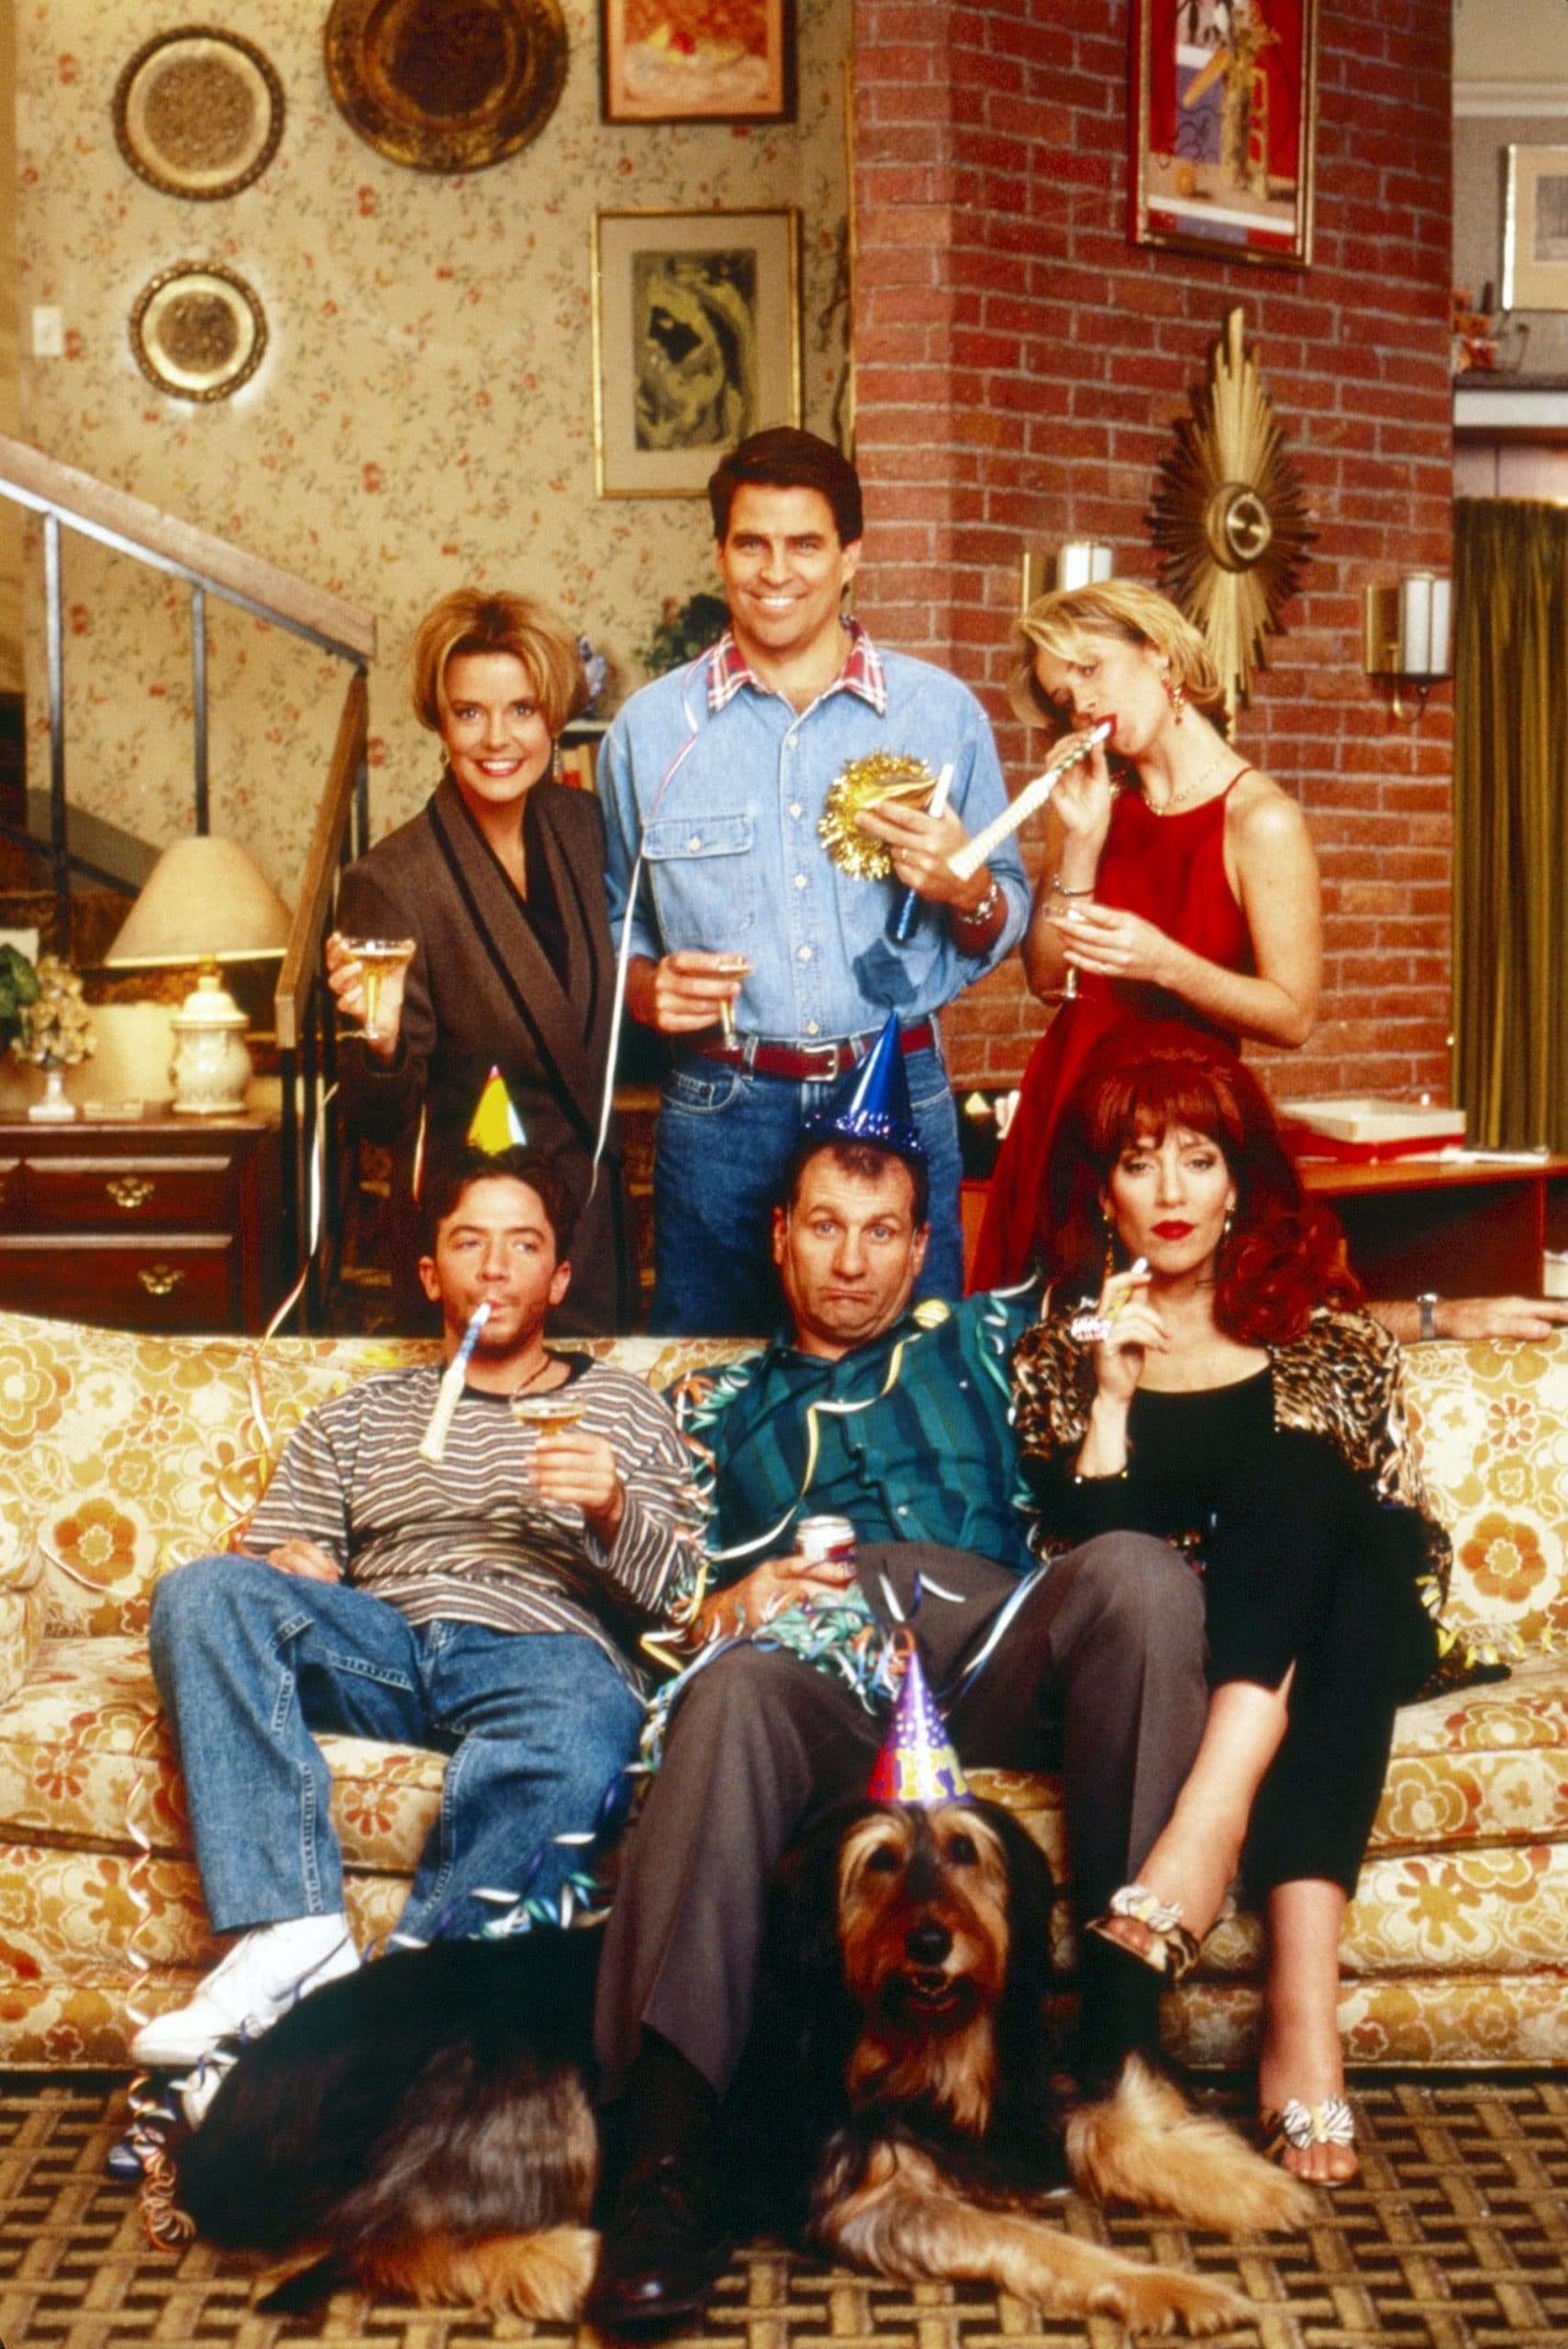 MARRIED...WITH CHILDREN, clockwise from top left: Amanda Bearse, Ted McGinley, Christina Applegate, Katey Sagal, Ed O'Neill, David Faustino